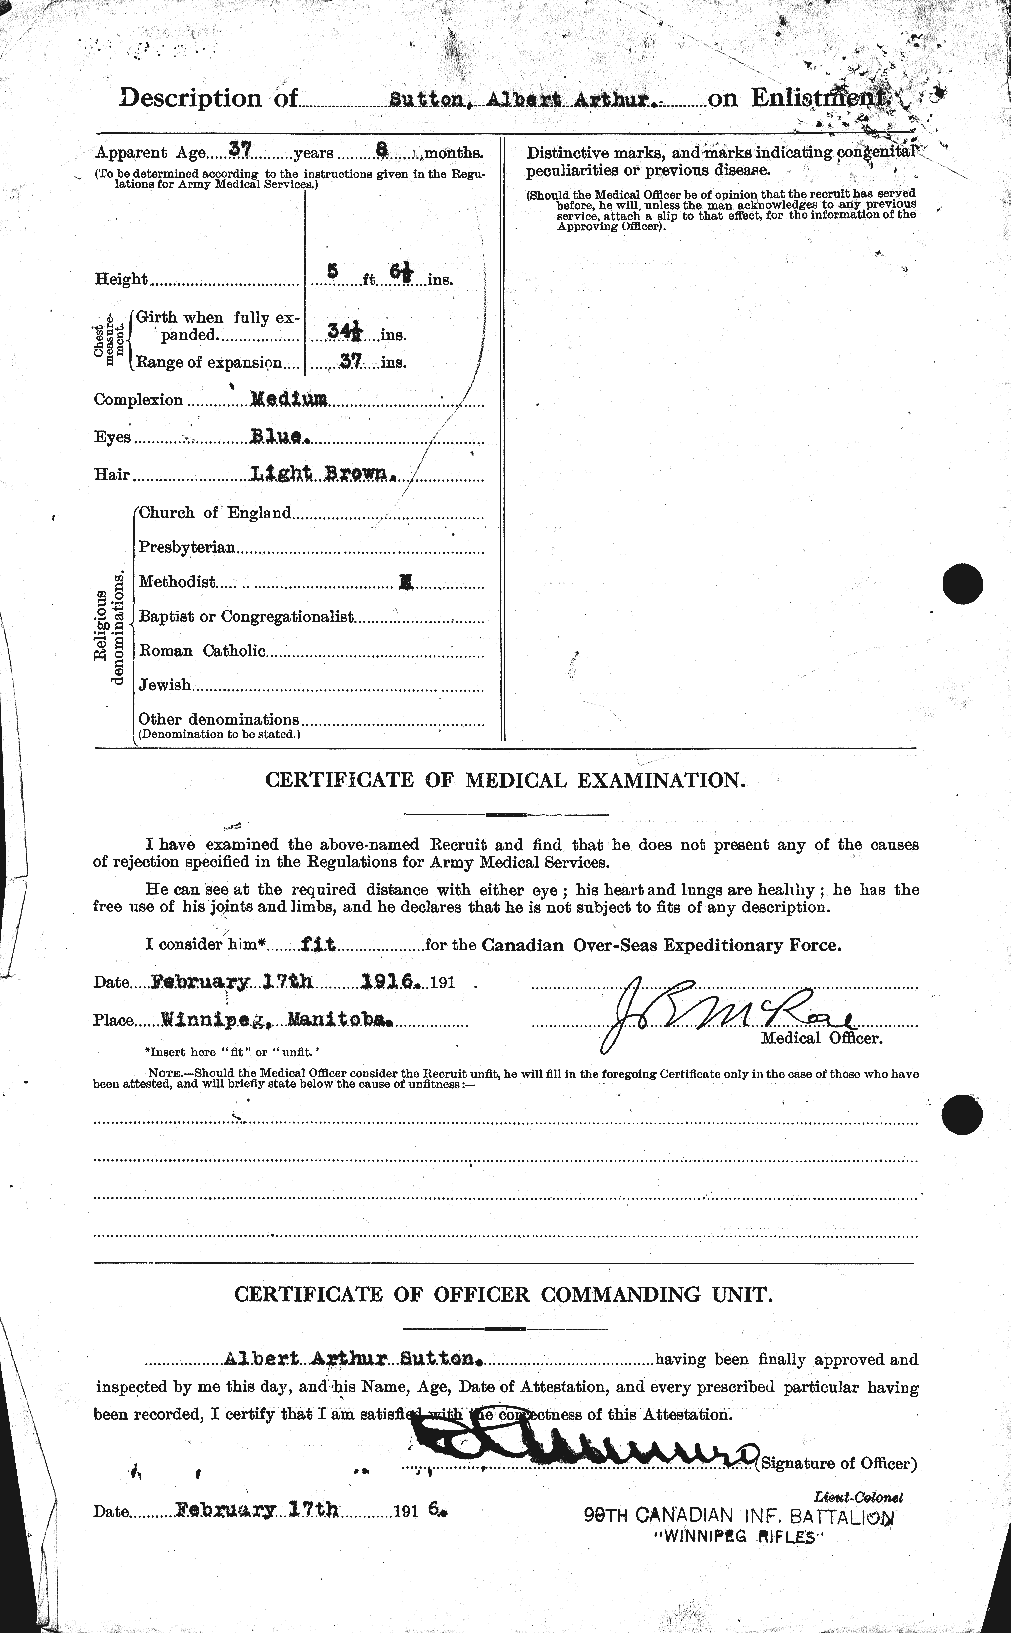 Personnel Records of the First World War - CEF 126070b